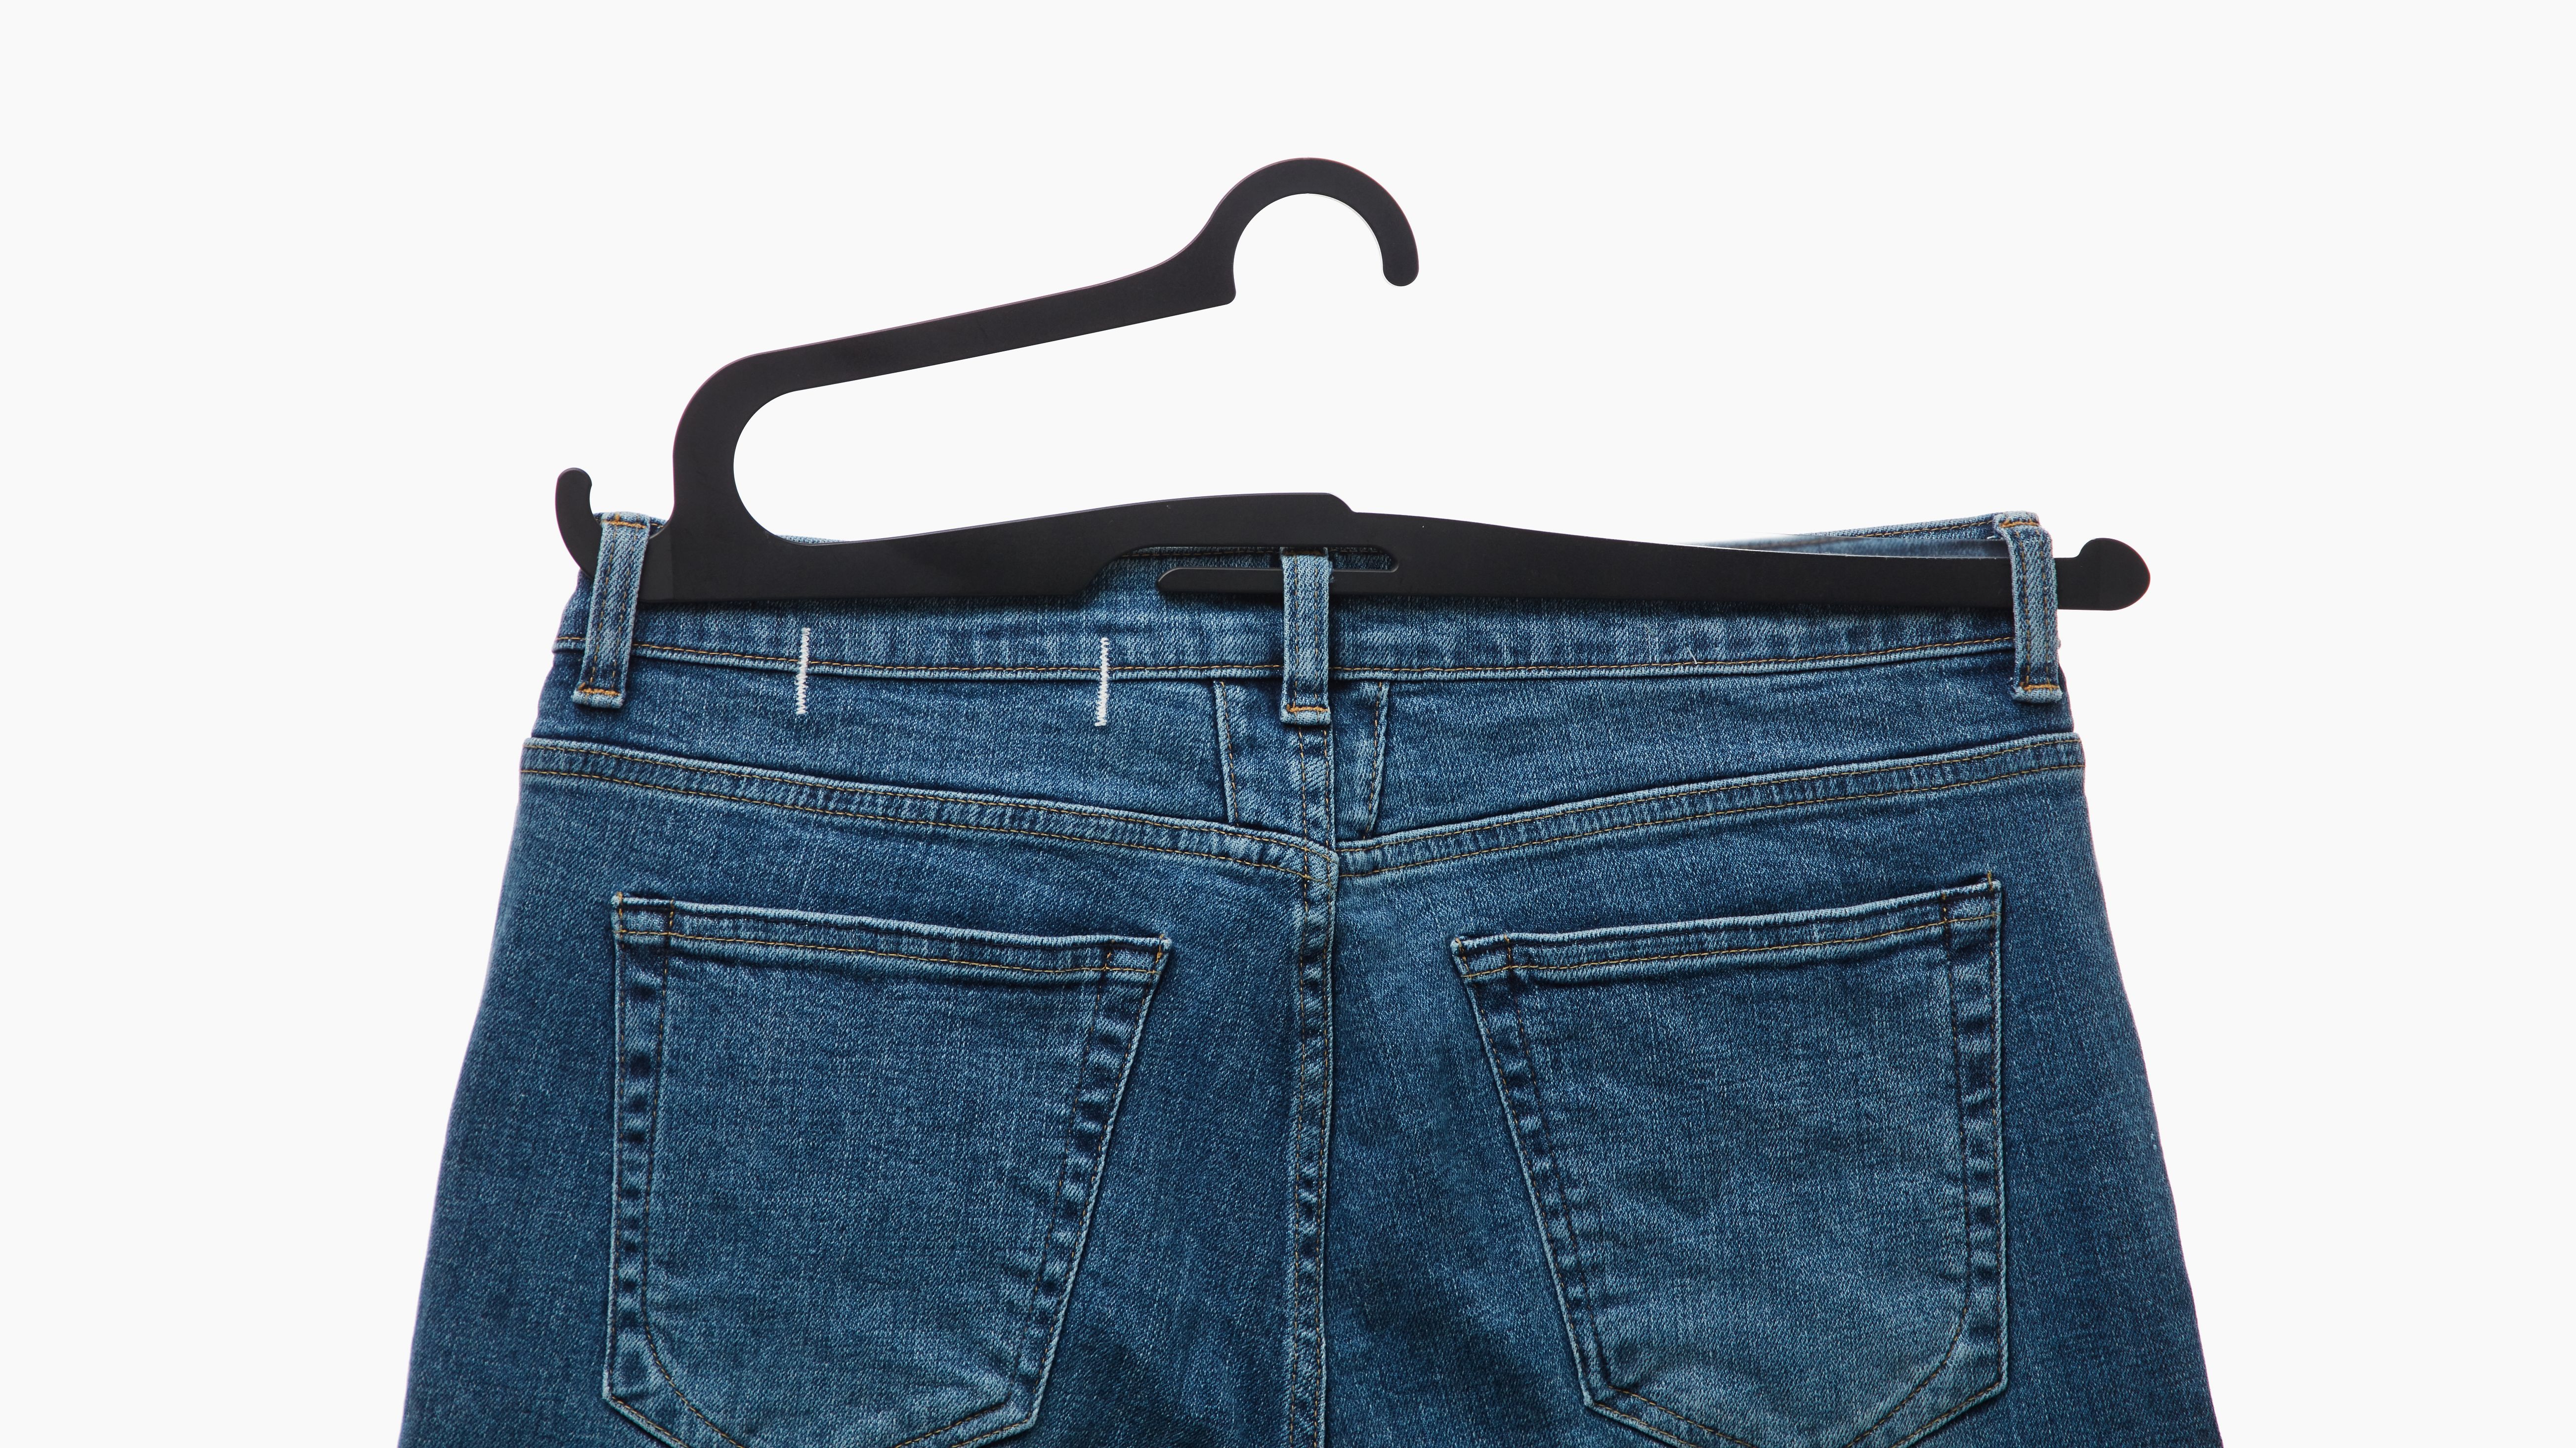 This Ingenious Hanger Makes Hanging Pants a Breeze, No Clips or Folds